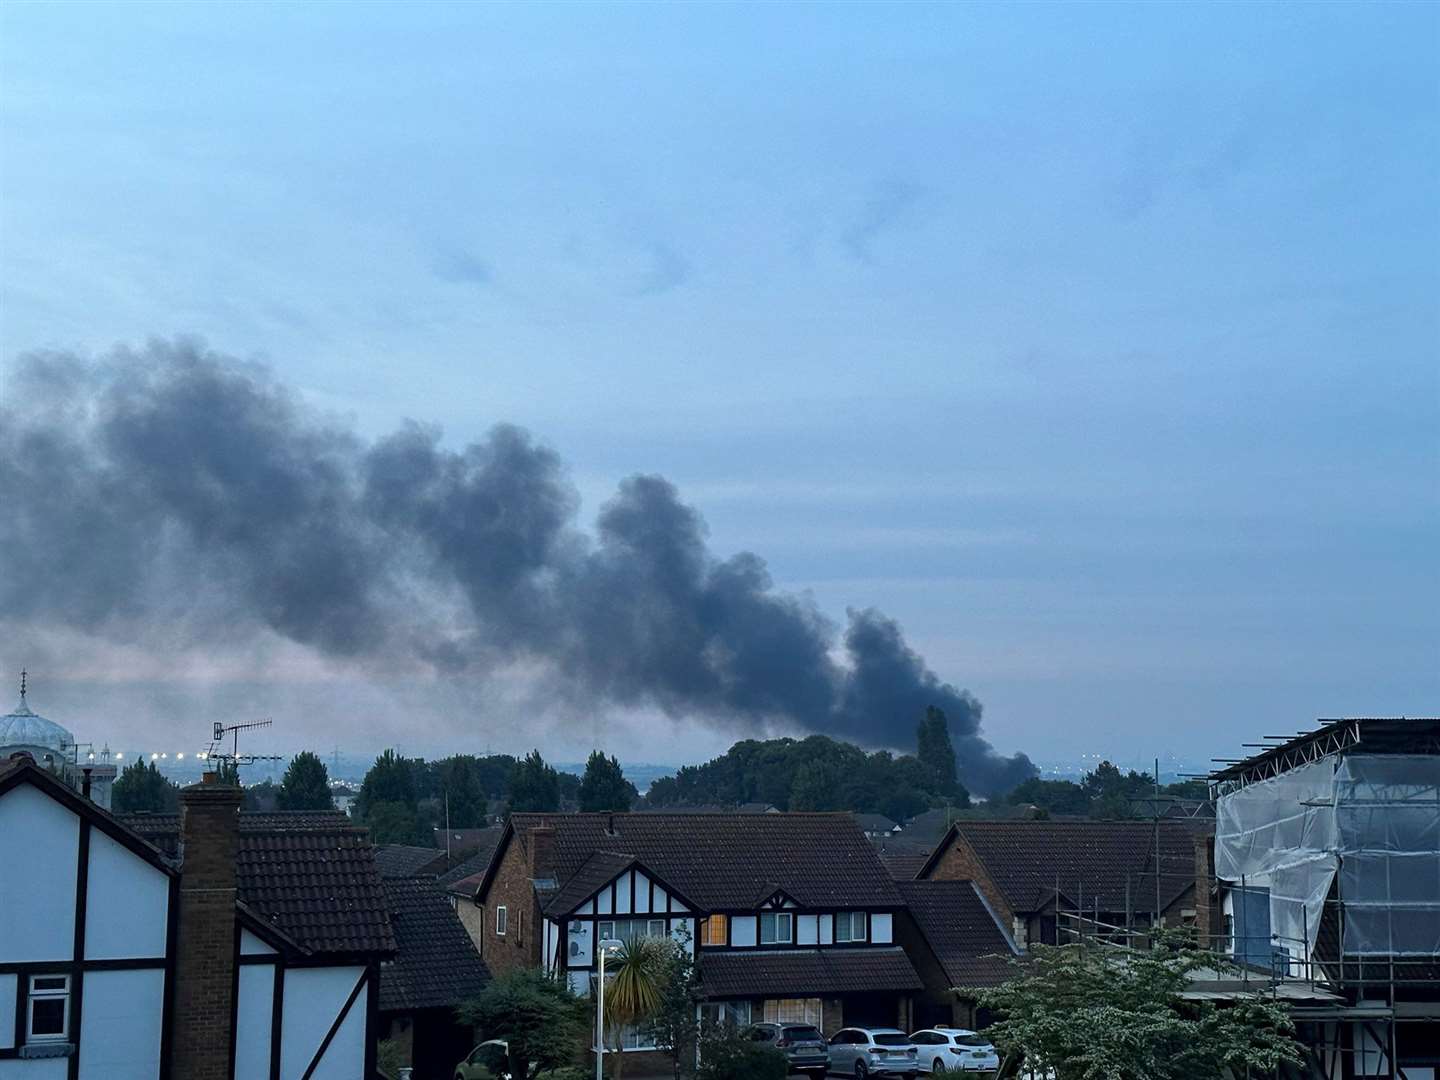 The fire has broken out in Gravesend